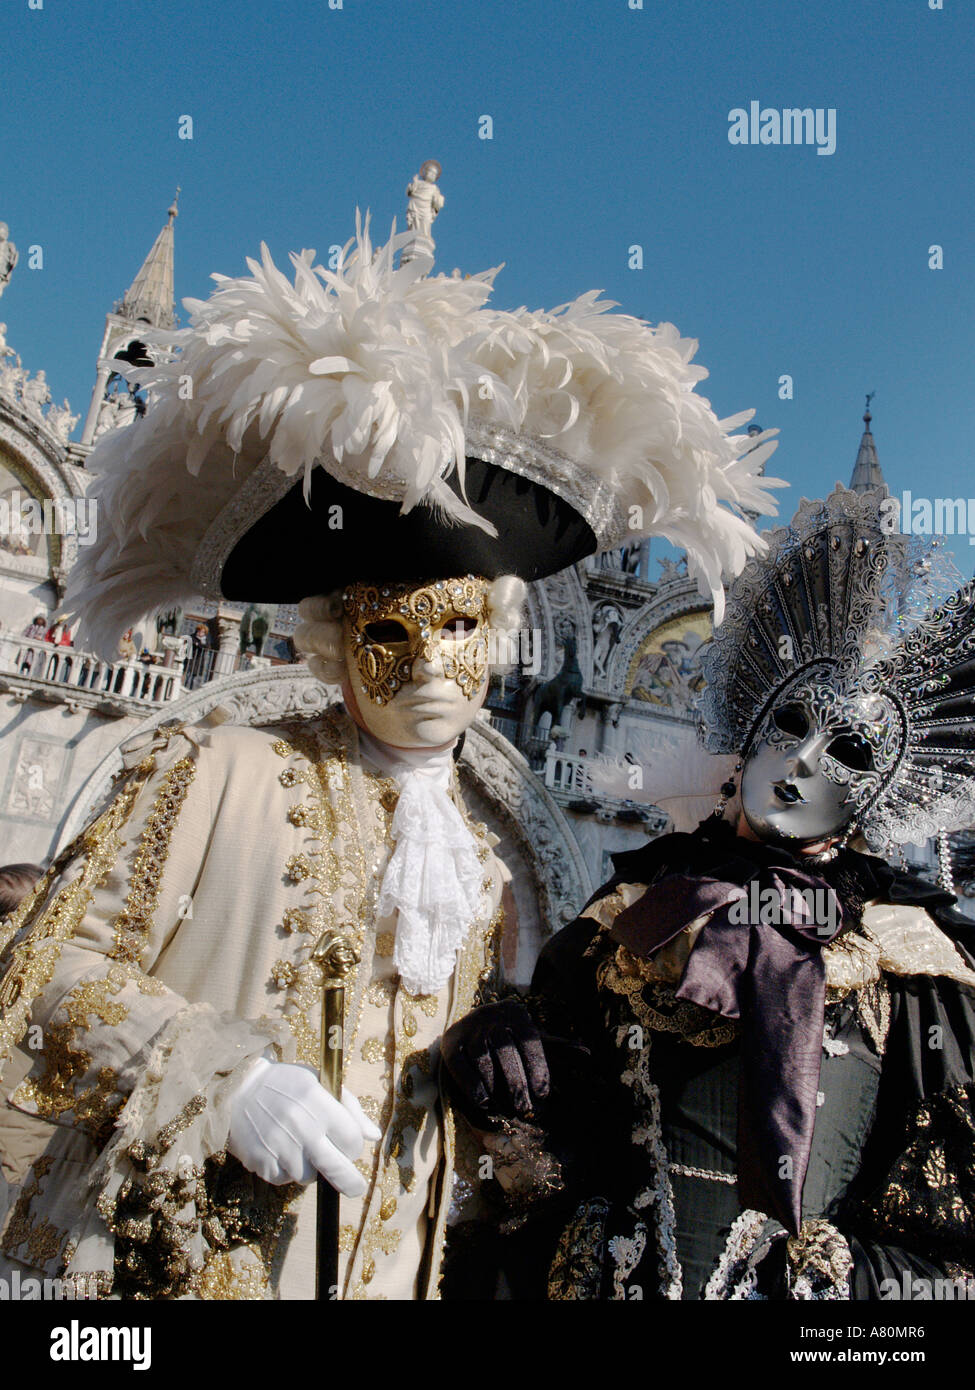 Man wearing 18th century costume and woman in silver mask Venice carnival Stock Photo